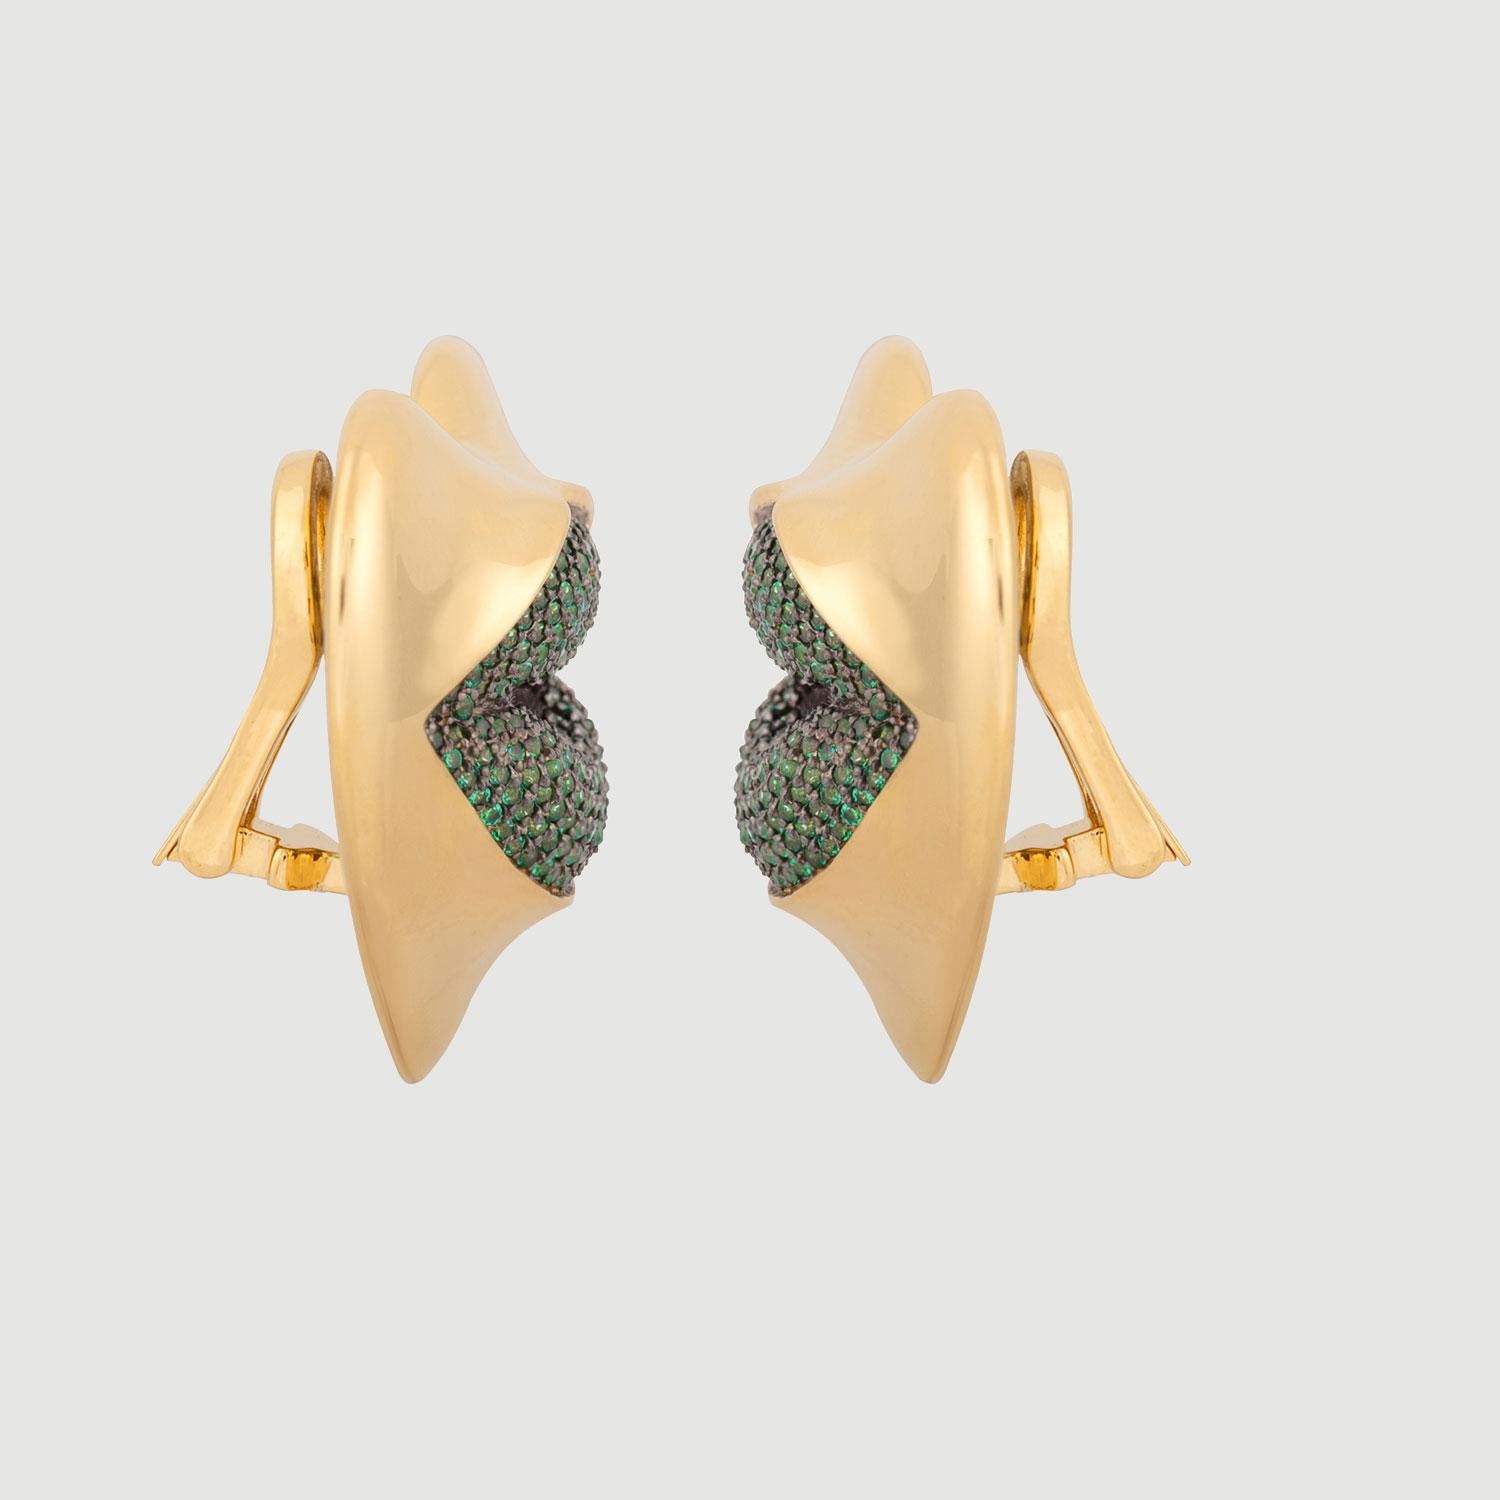 Love starts with the heart and lasts on the lips. These might be the sexiest earrings ever! Our sexy gold statement heart earrings with peridot kisses. Shine your love on!

Composition: Sterling Silver, 18k gold vermeil and Rhodium plated.
Color: